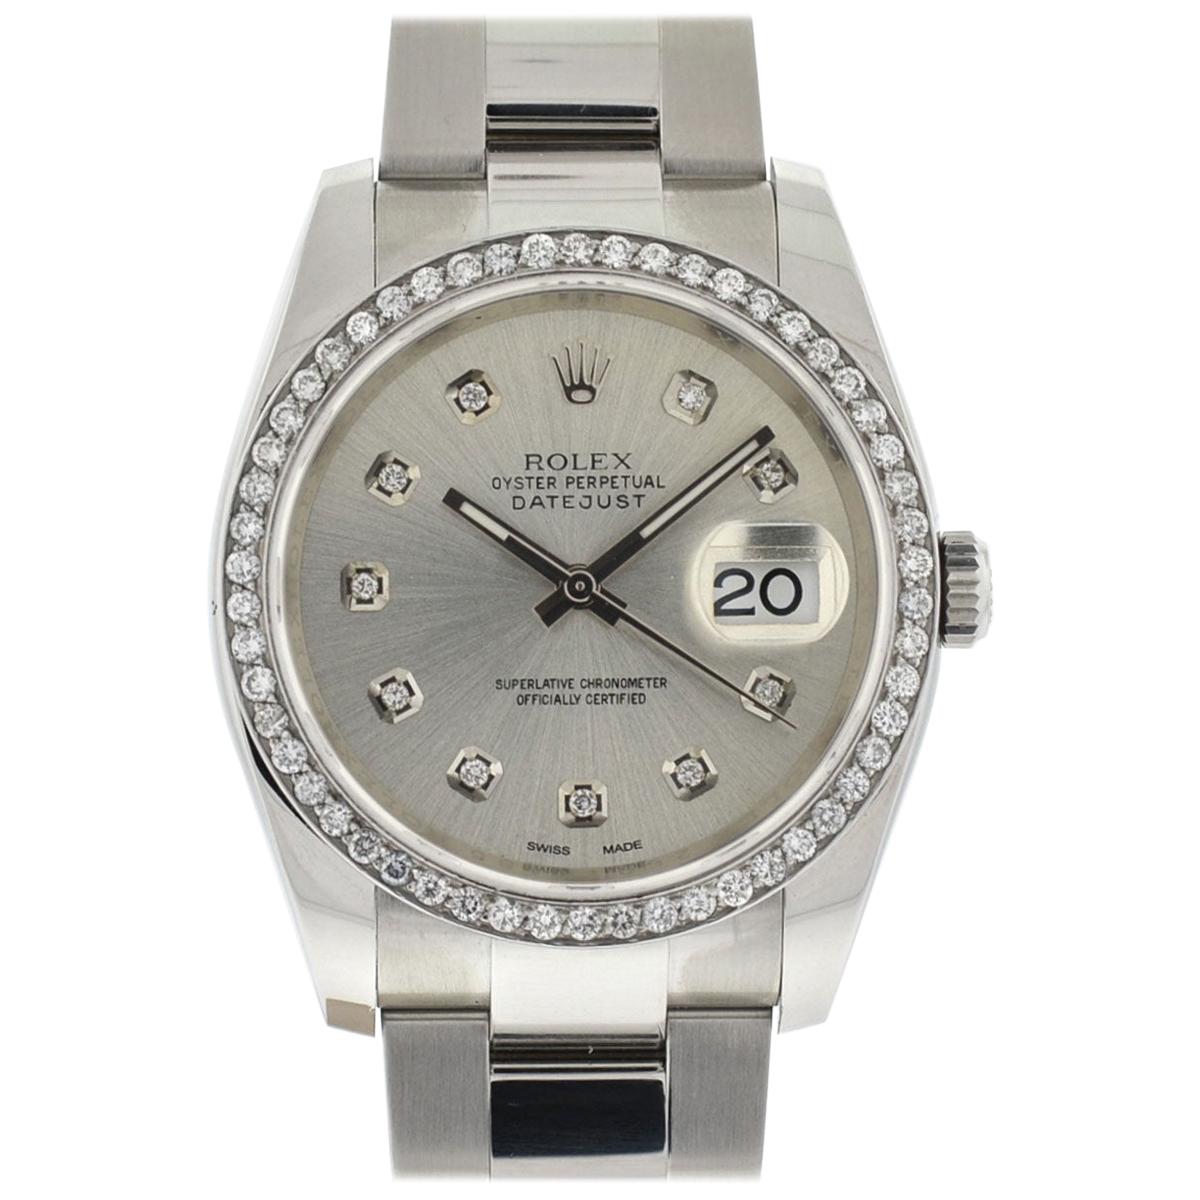 Rolex 116200 Datejust Stainless Steel Silver Diamond Dial and Bezel Watch